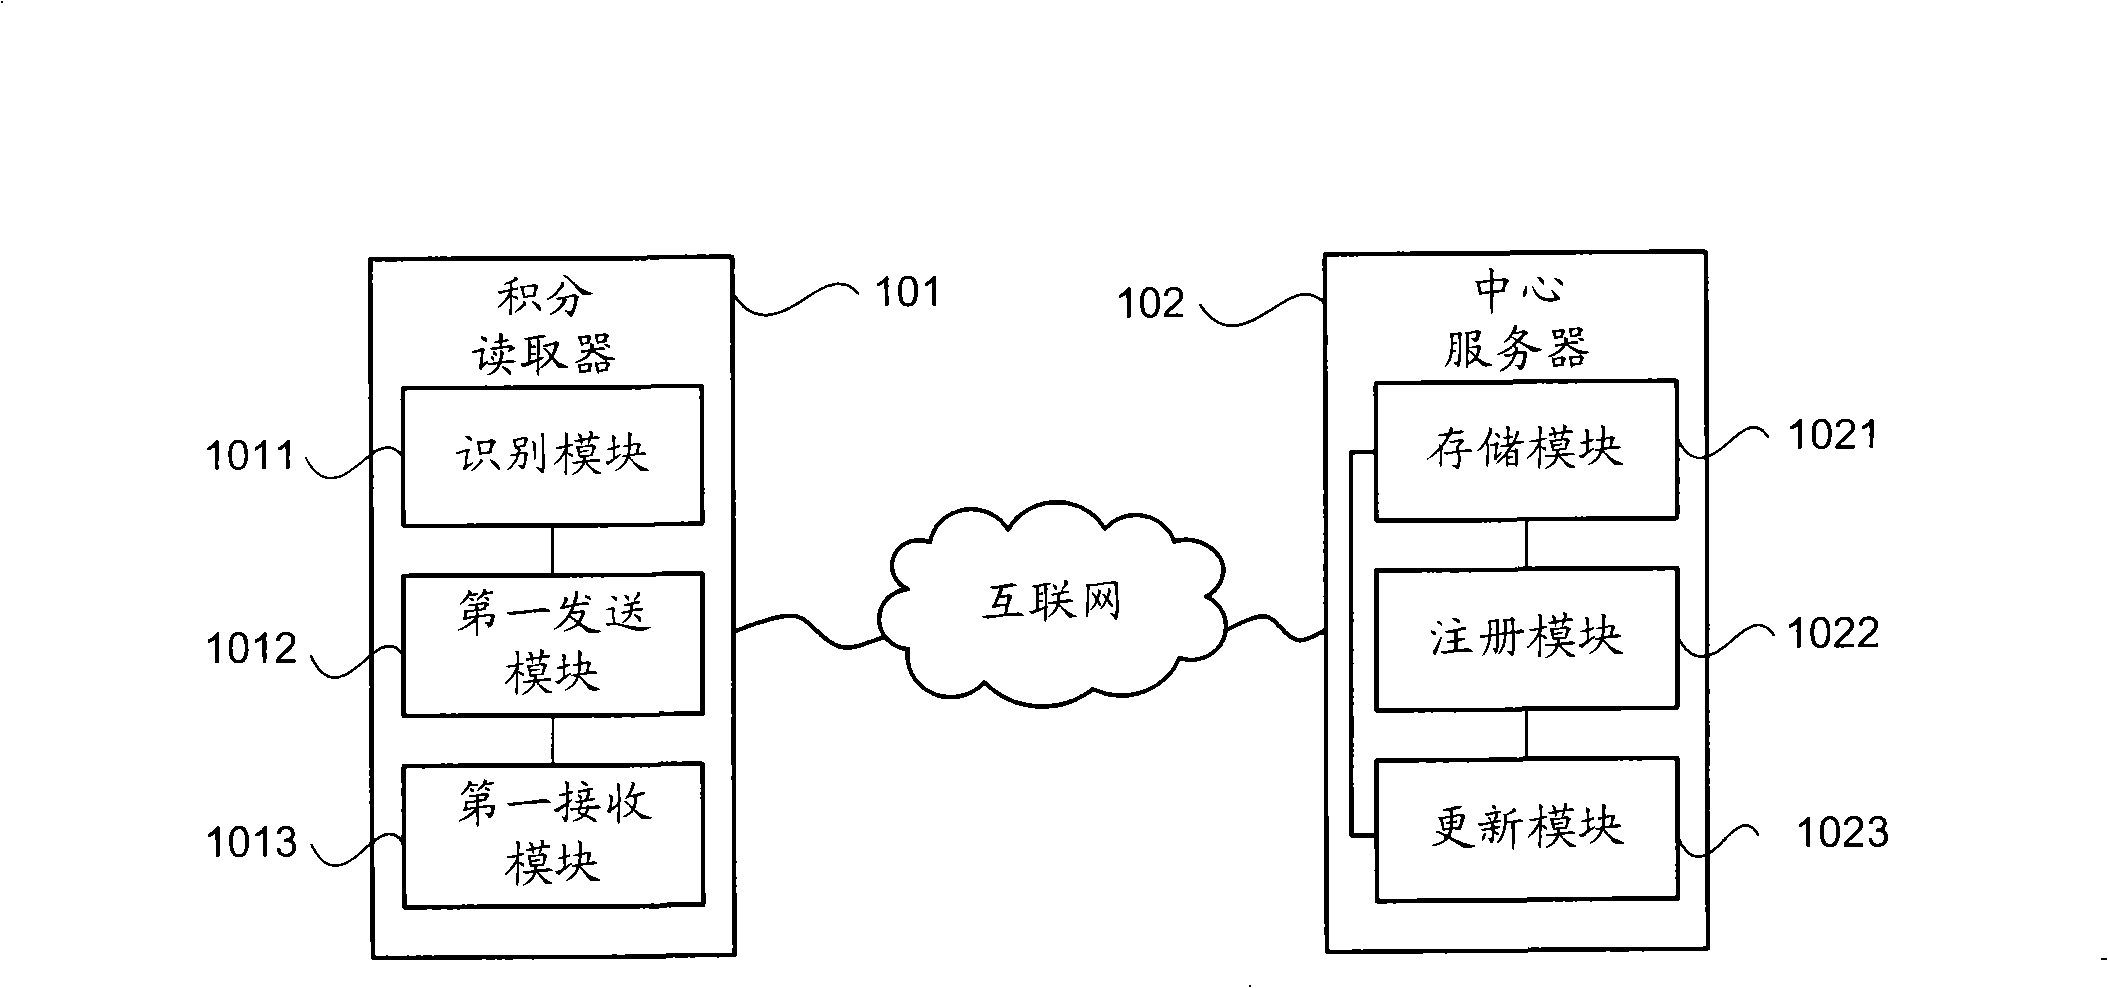 System and method for processing integration data